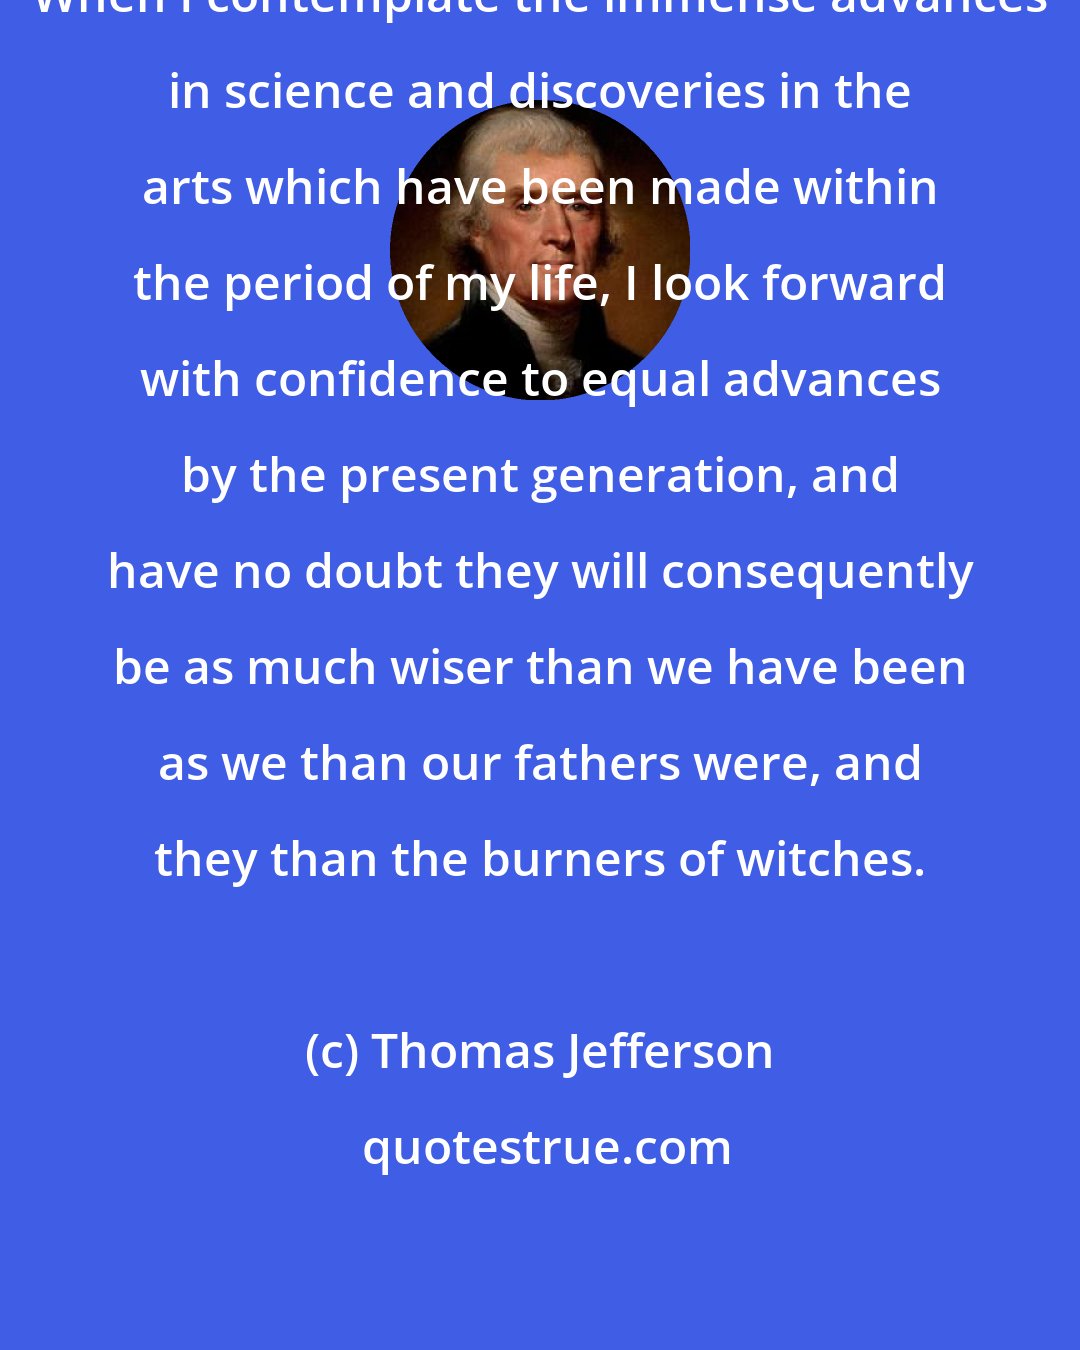 Thomas Jefferson: When I contemplate the immense advances in science and discoveries in the arts which have been made within the period of my life, I look forward with confidence to equal advances by the present generation, and have no doubt they will consequently be as much wiser than we have been as we than our fathers were, and they than the burners of witches.